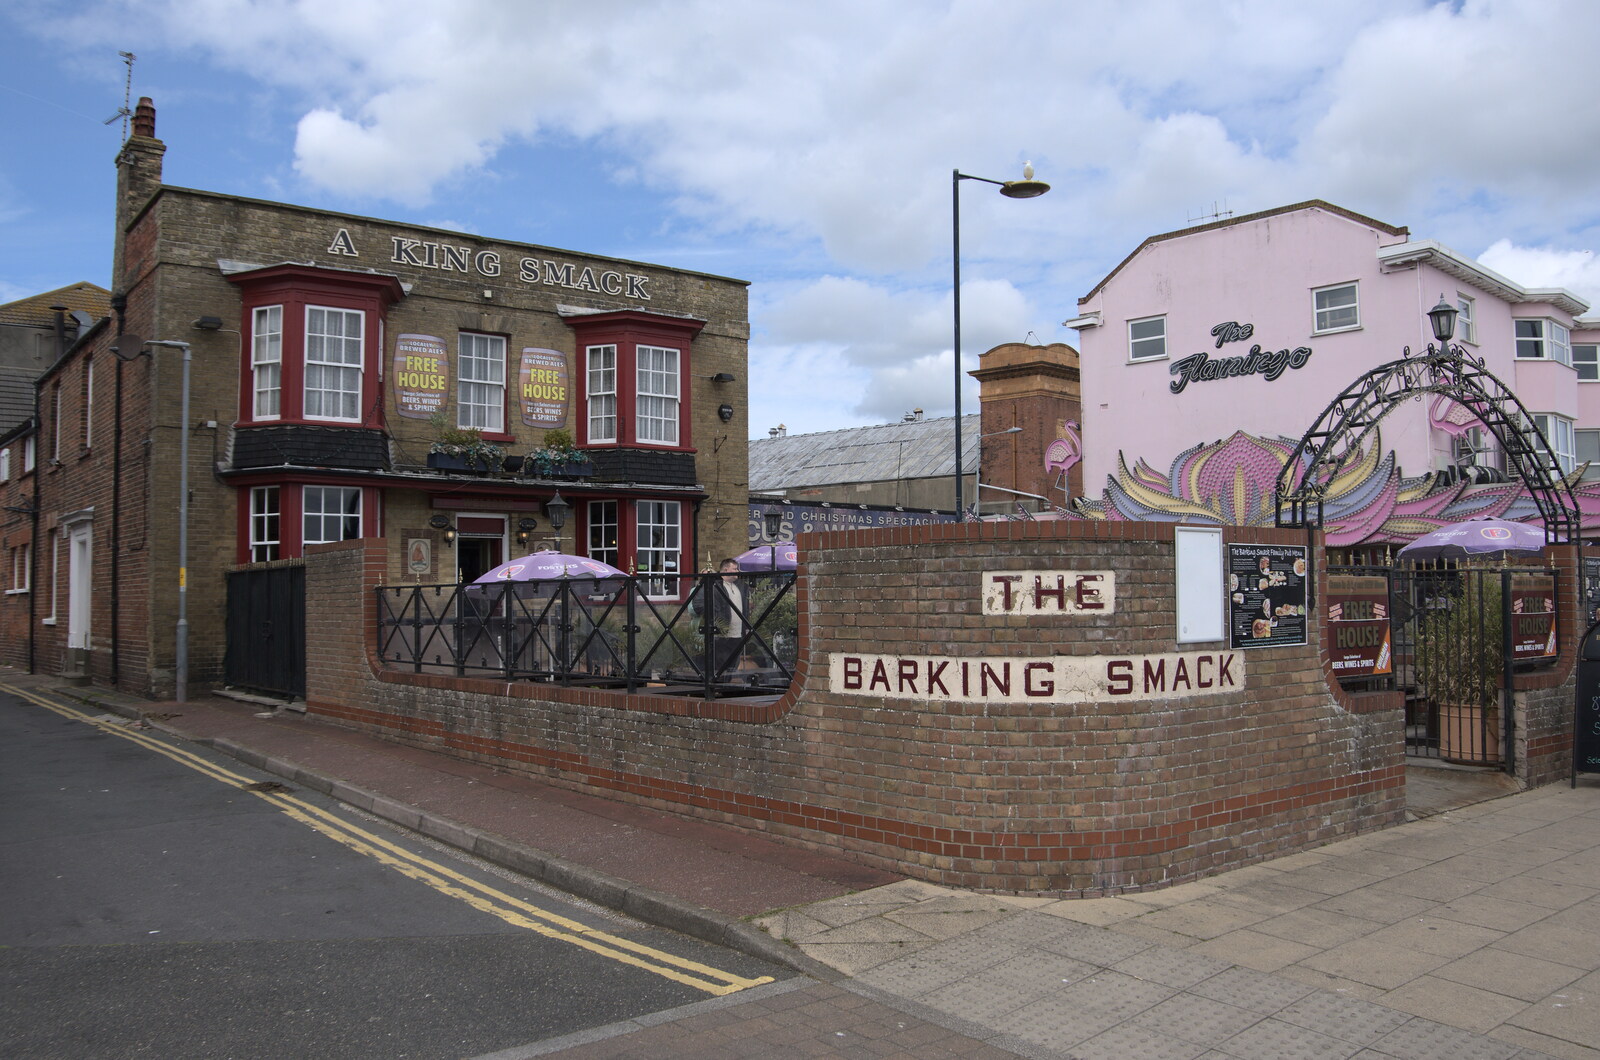 The Barking Smack pub - an original name at least from Faded Seaside Glamour: A Weekend in Great Yarmouth, Norfolk - 29th May 2022